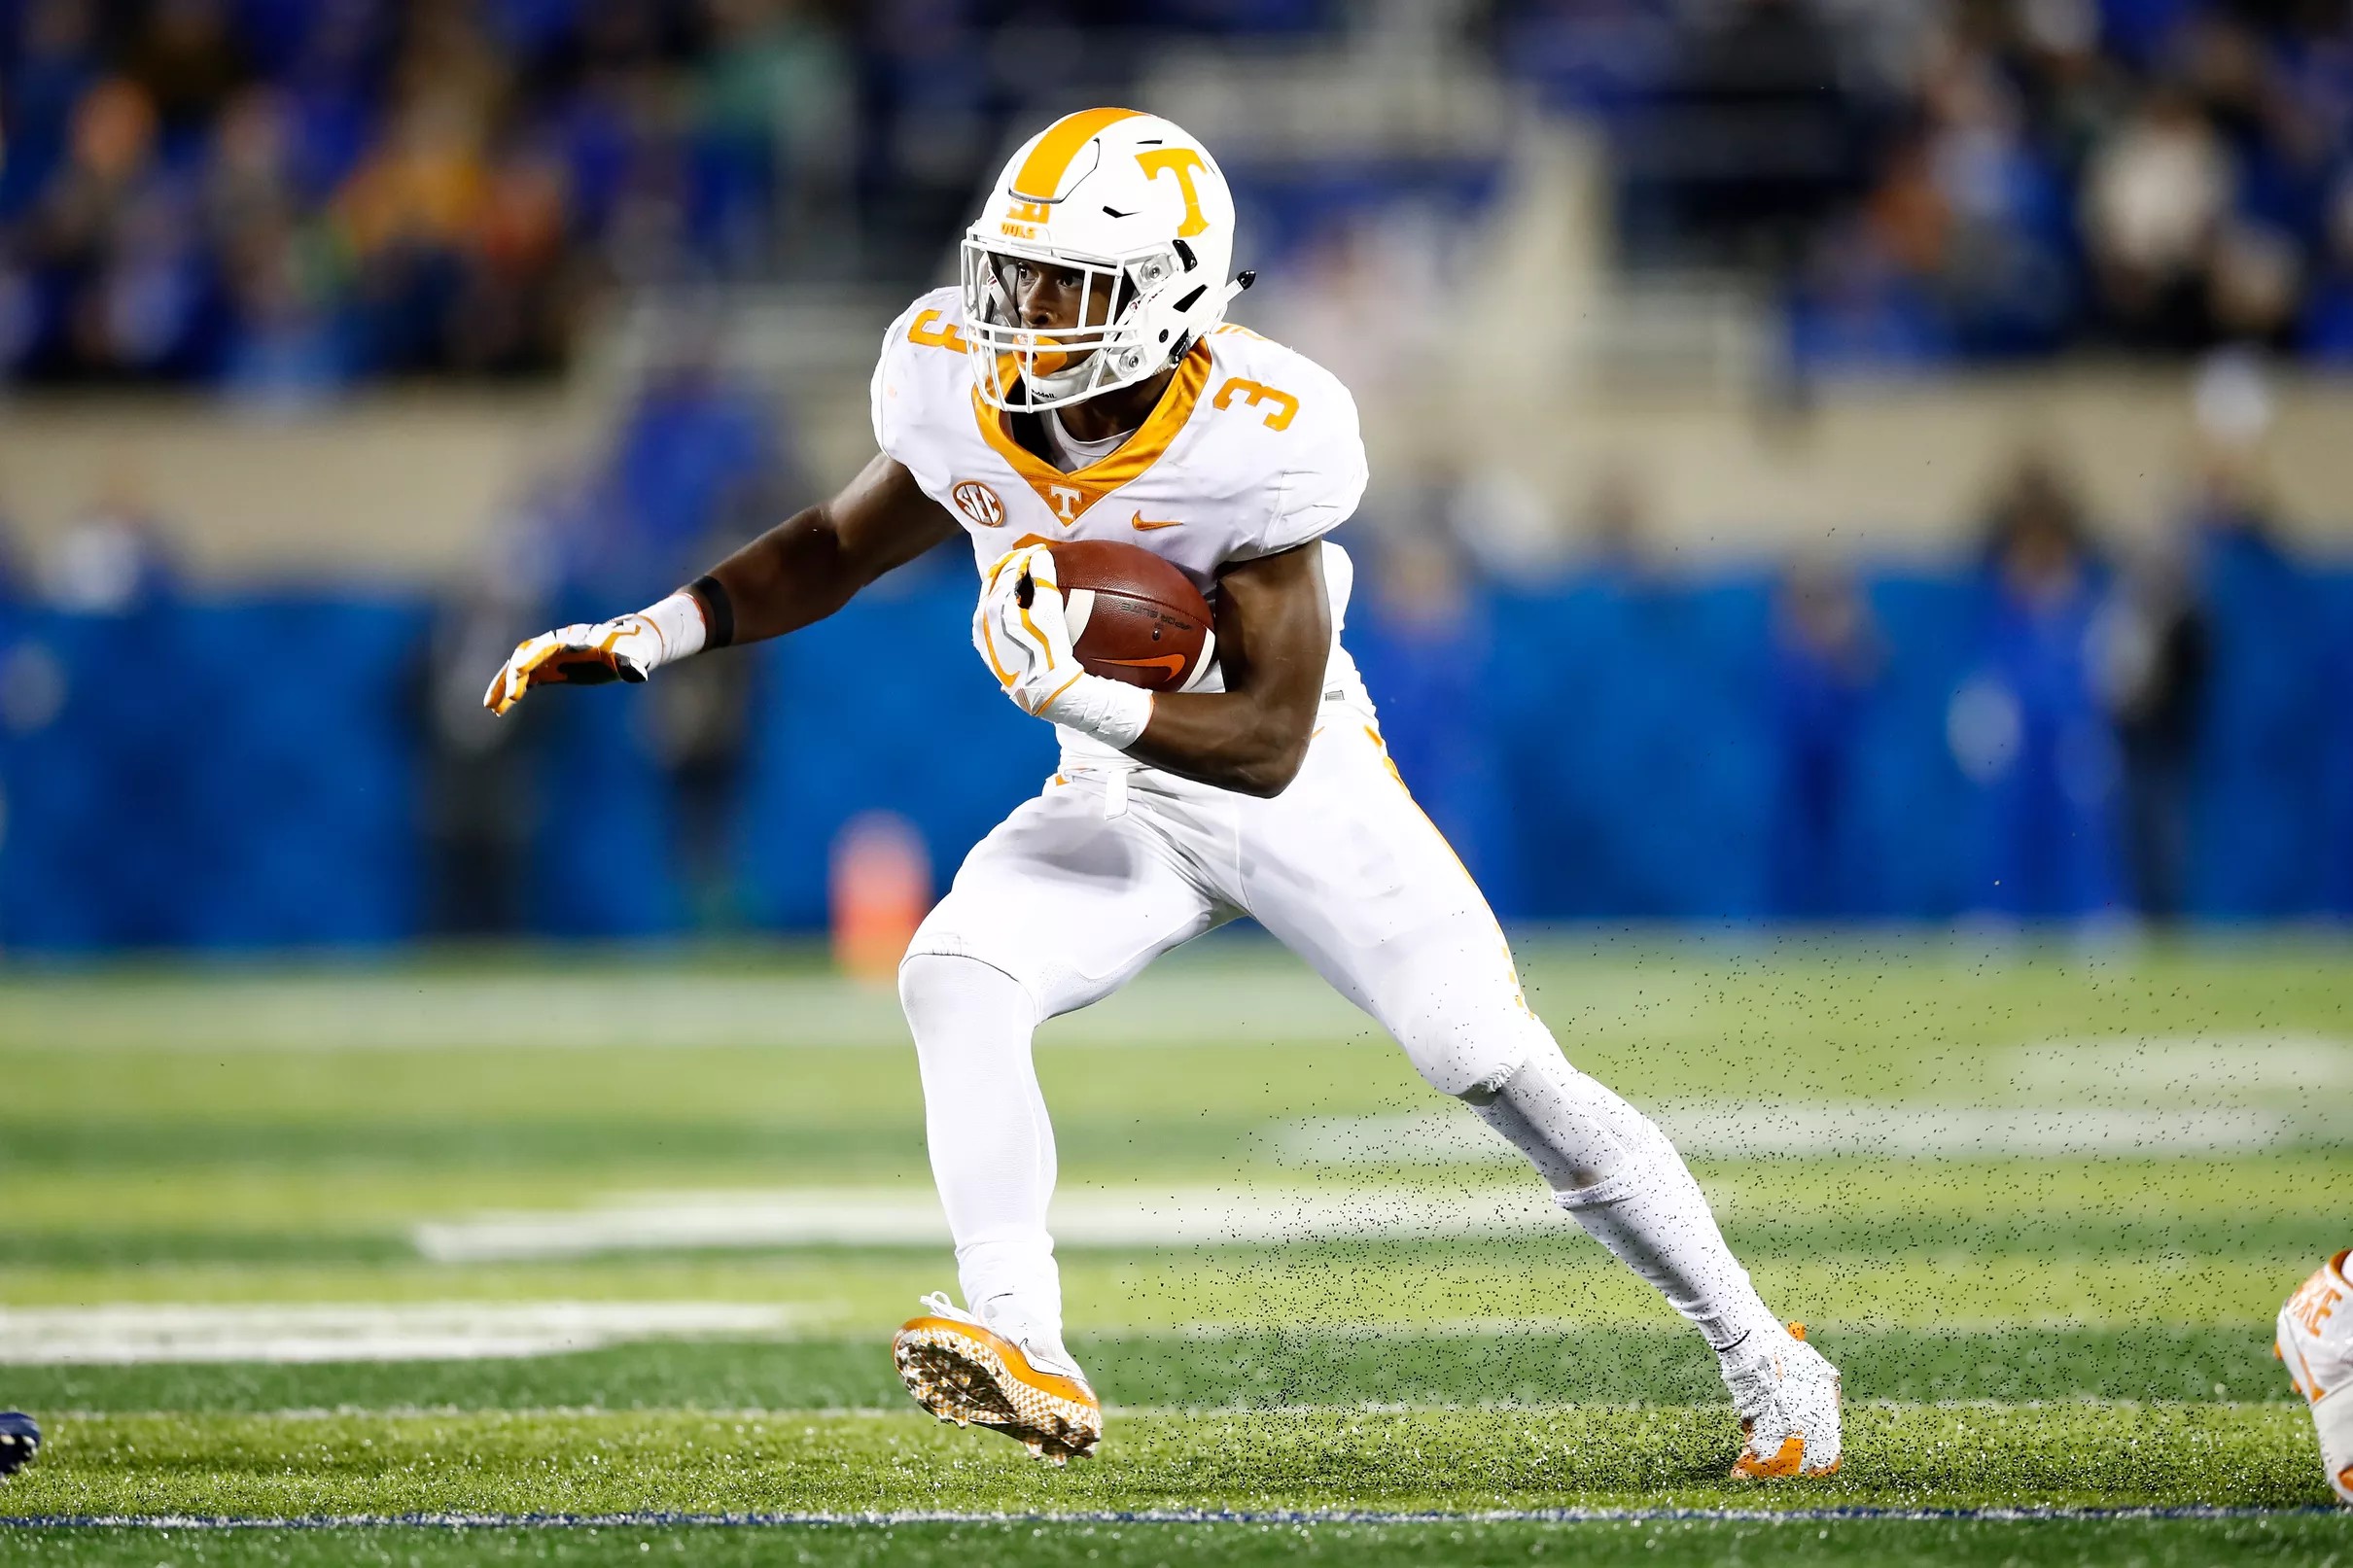 Ty Chandler named top breakout running back candidate by Athlon Sports